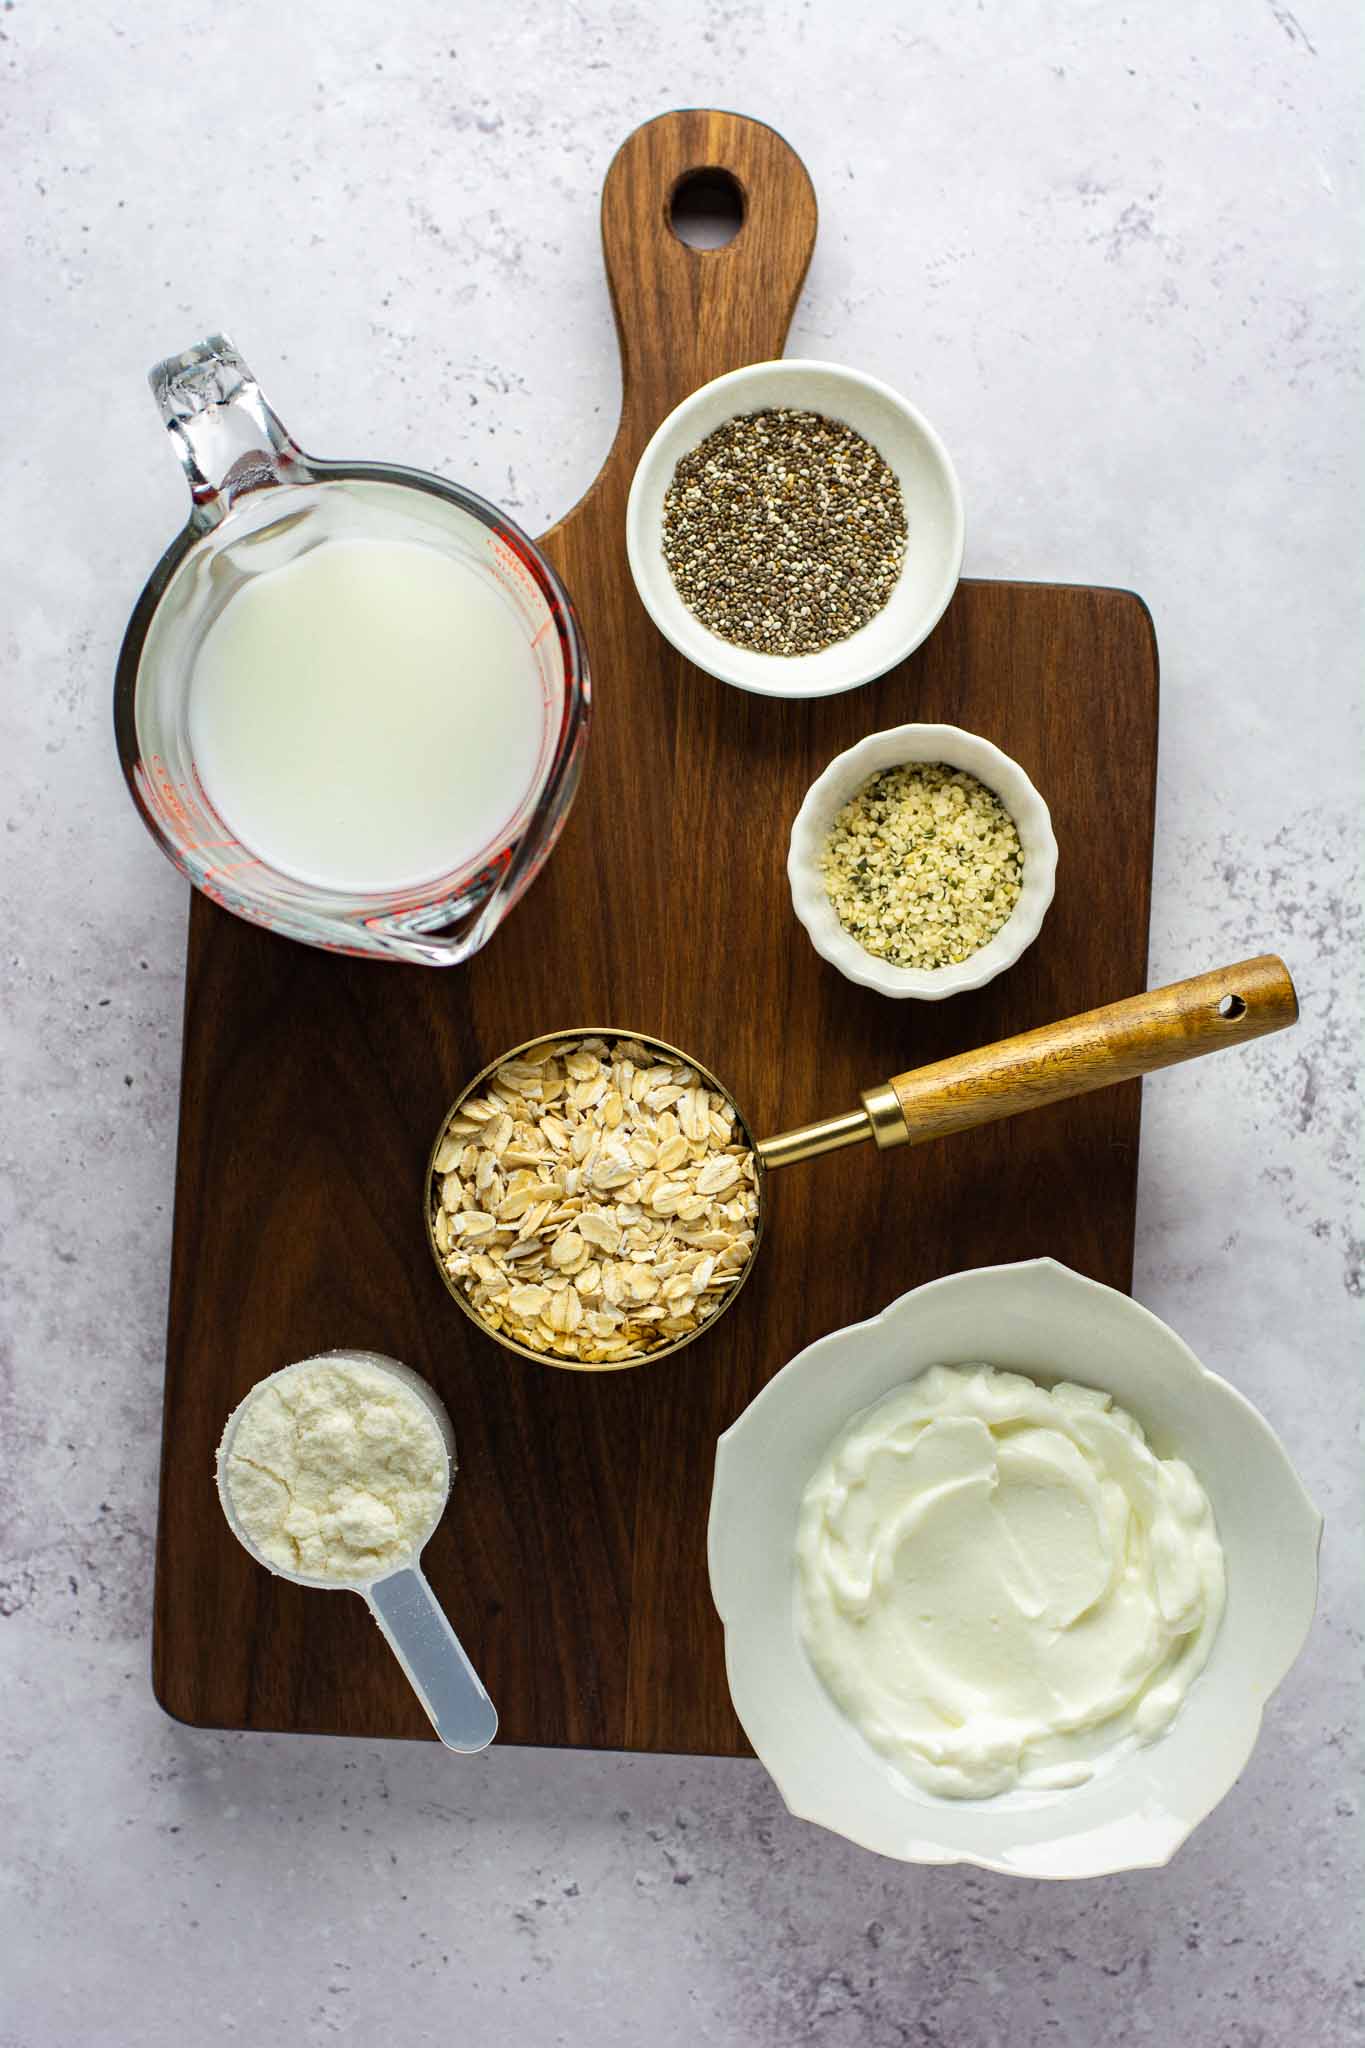 Ingredients to make protein overnight oats